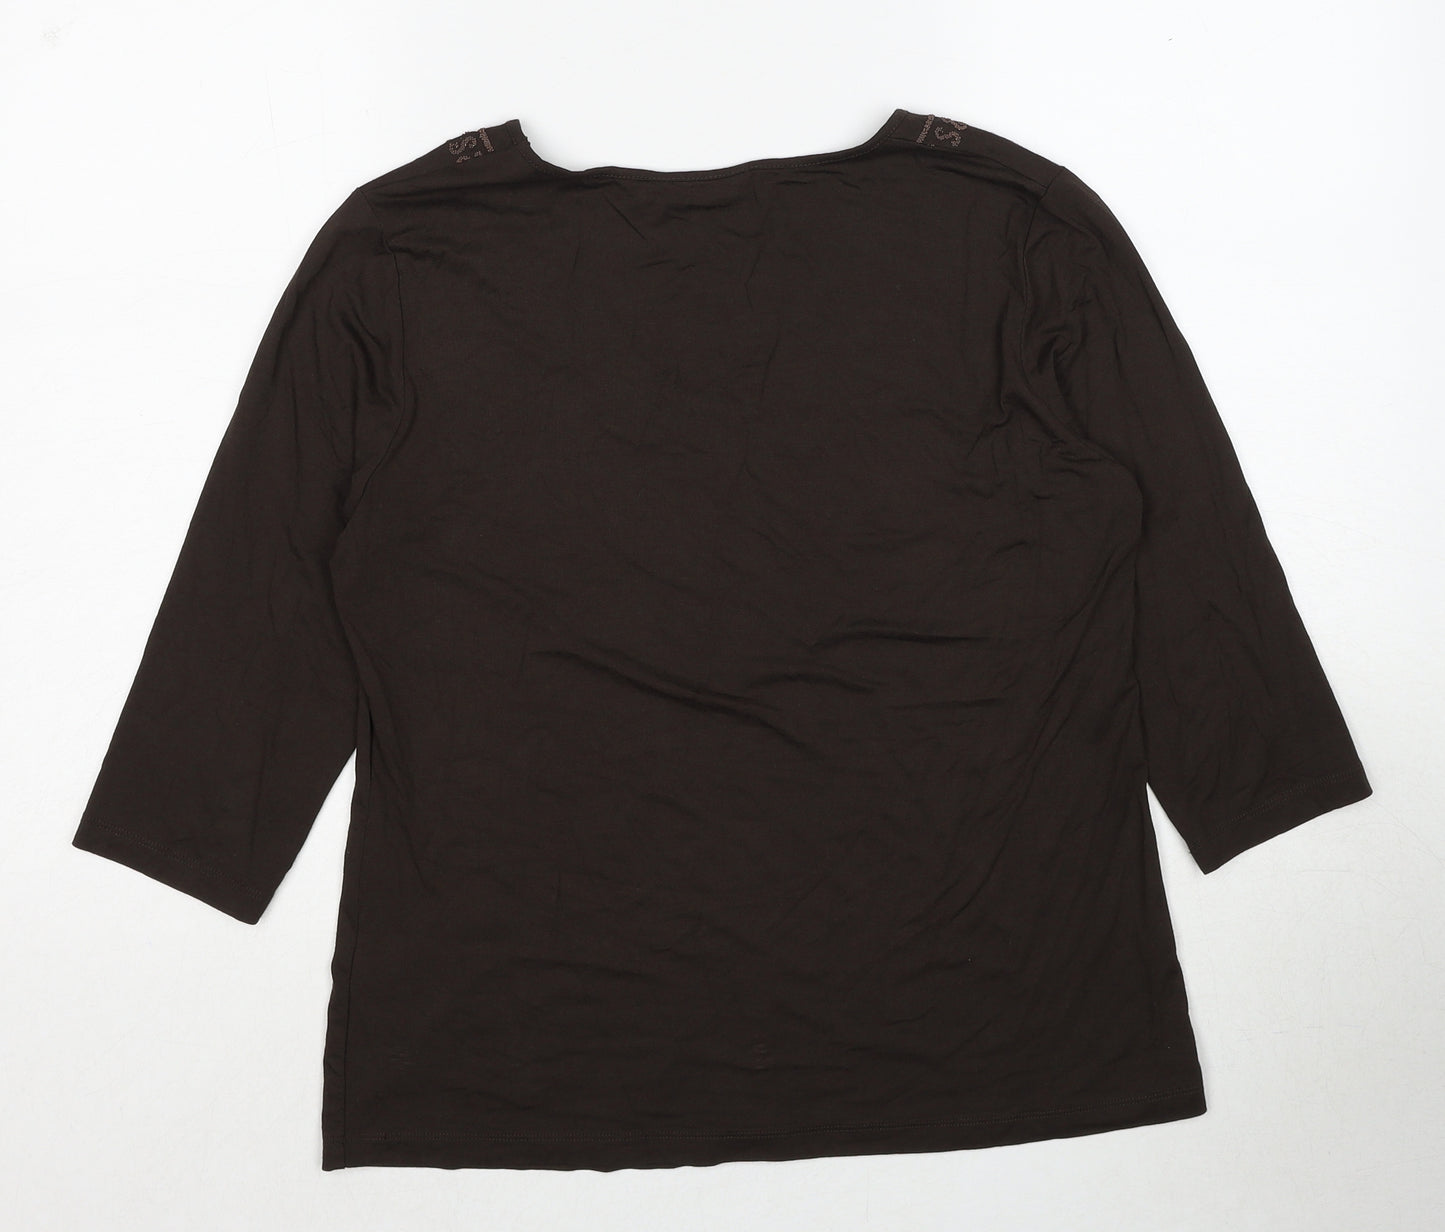 Marks and Spencer Womens Brown Viscose Basic T-Shirt Size 14 Boat Neck